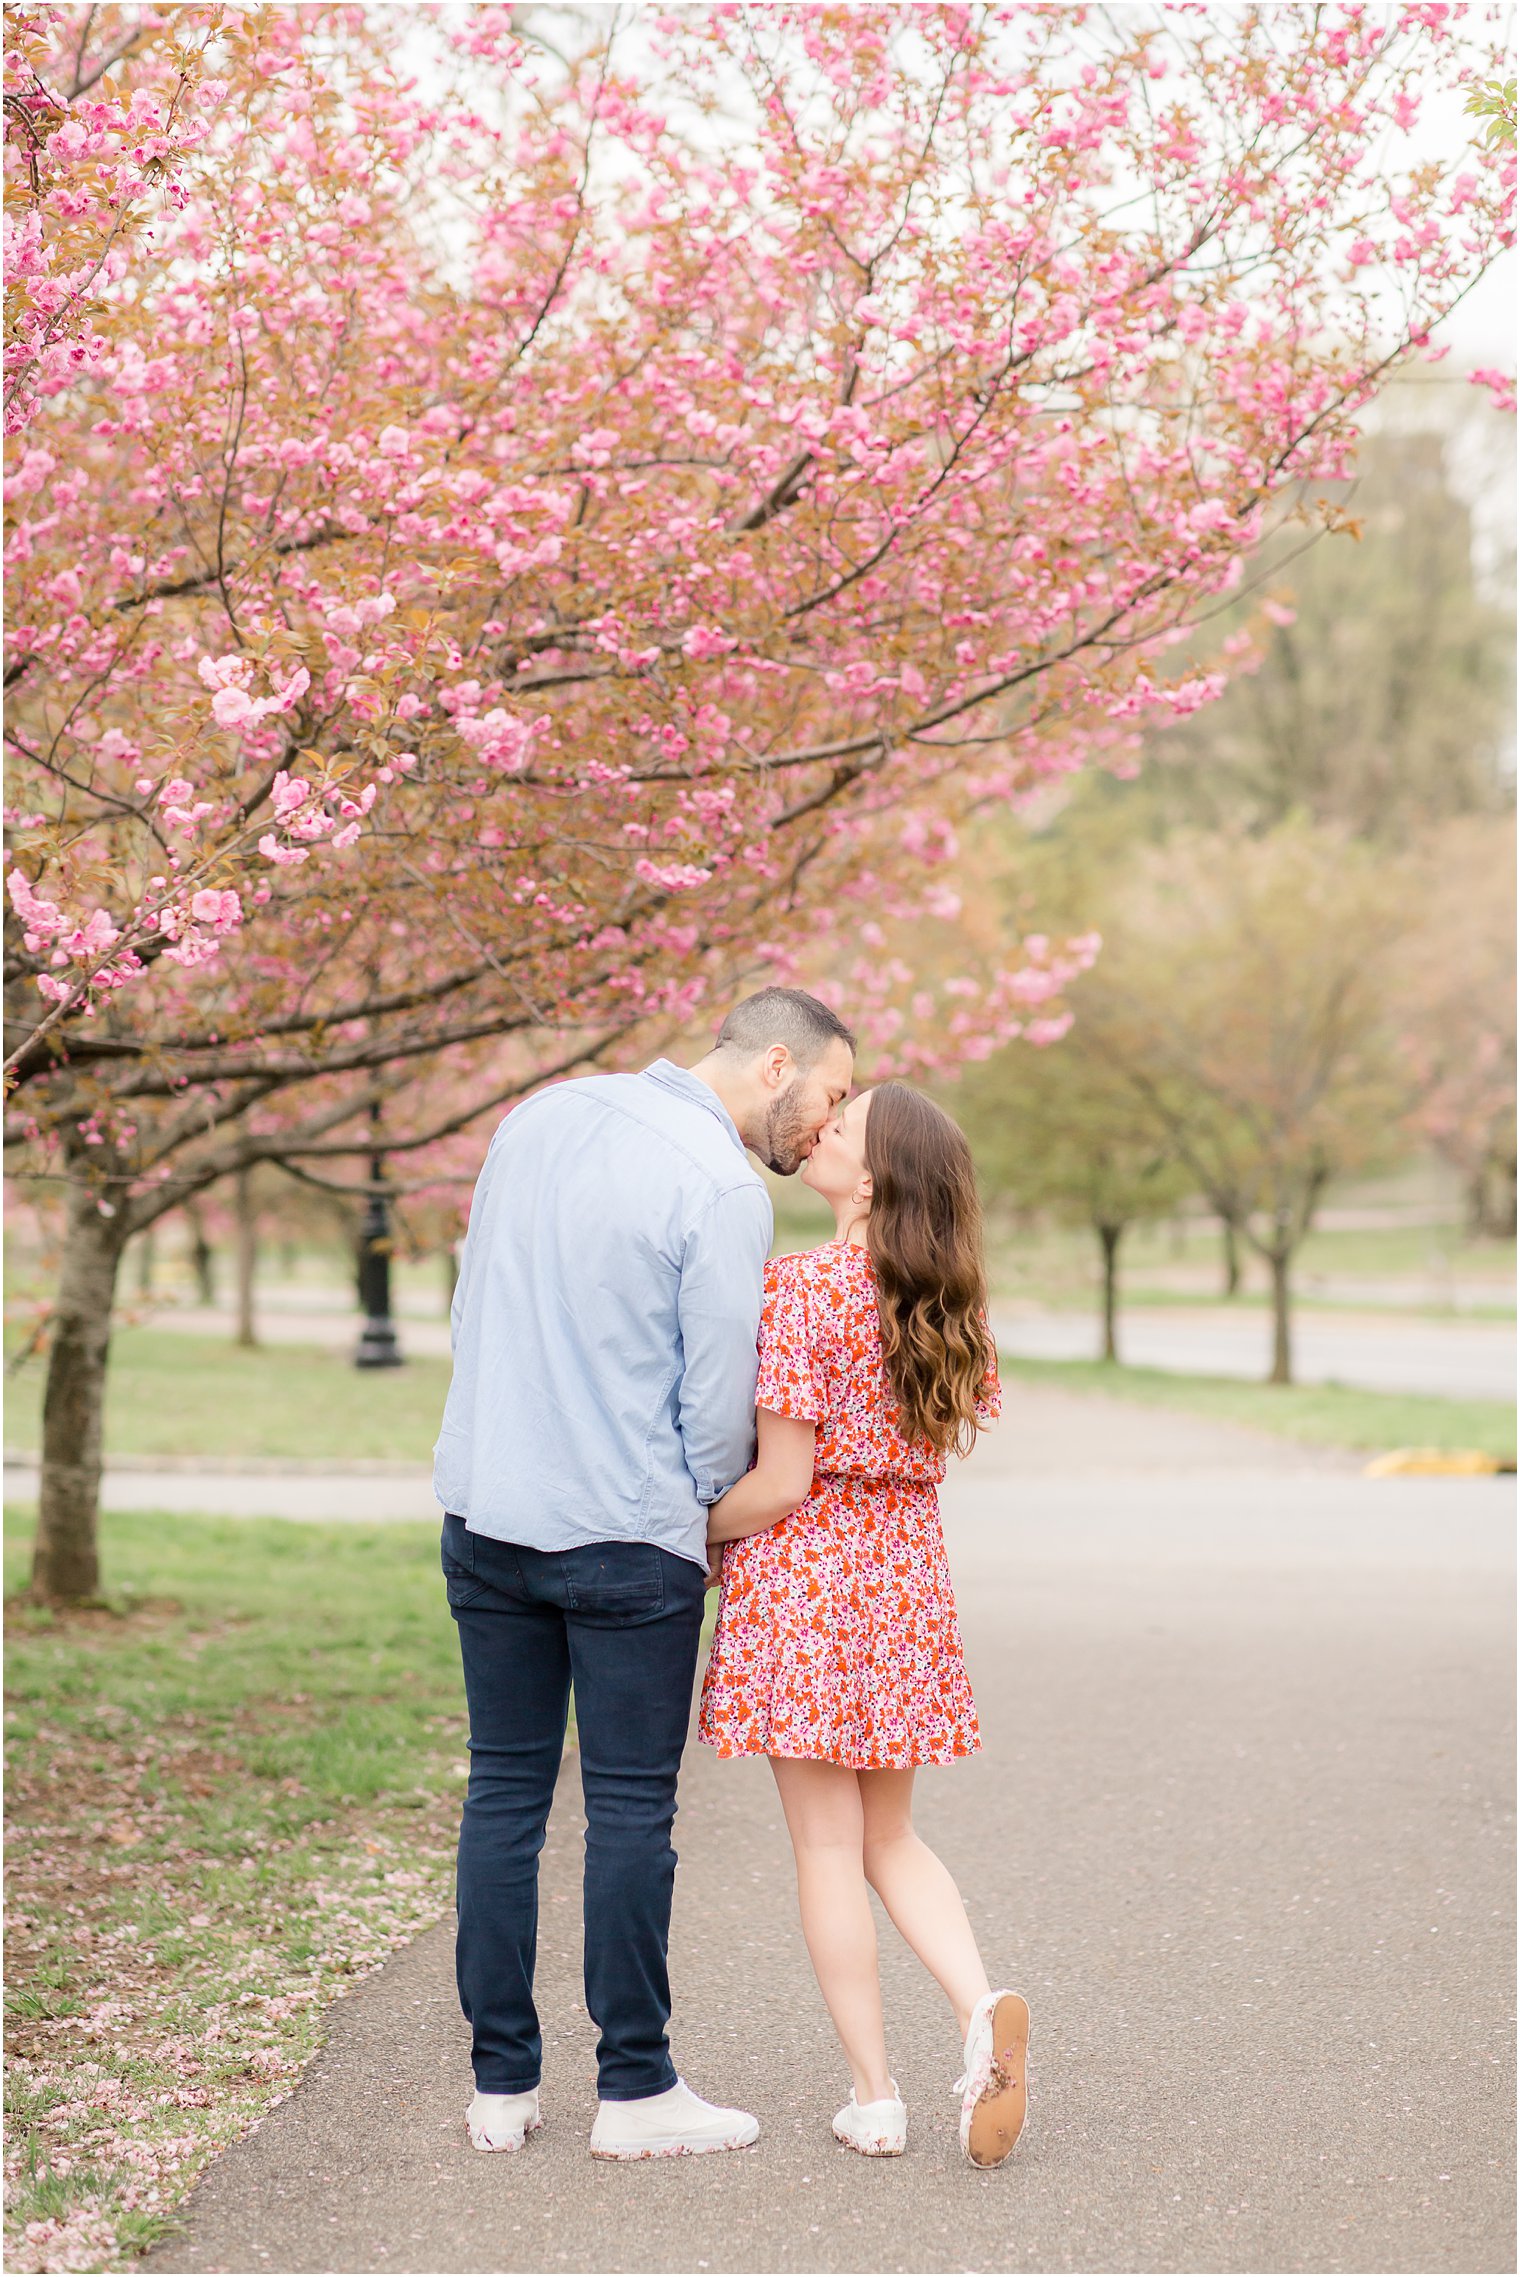 Engaged couple at Branch Brook Park in Newark NJ during cherry blossoms